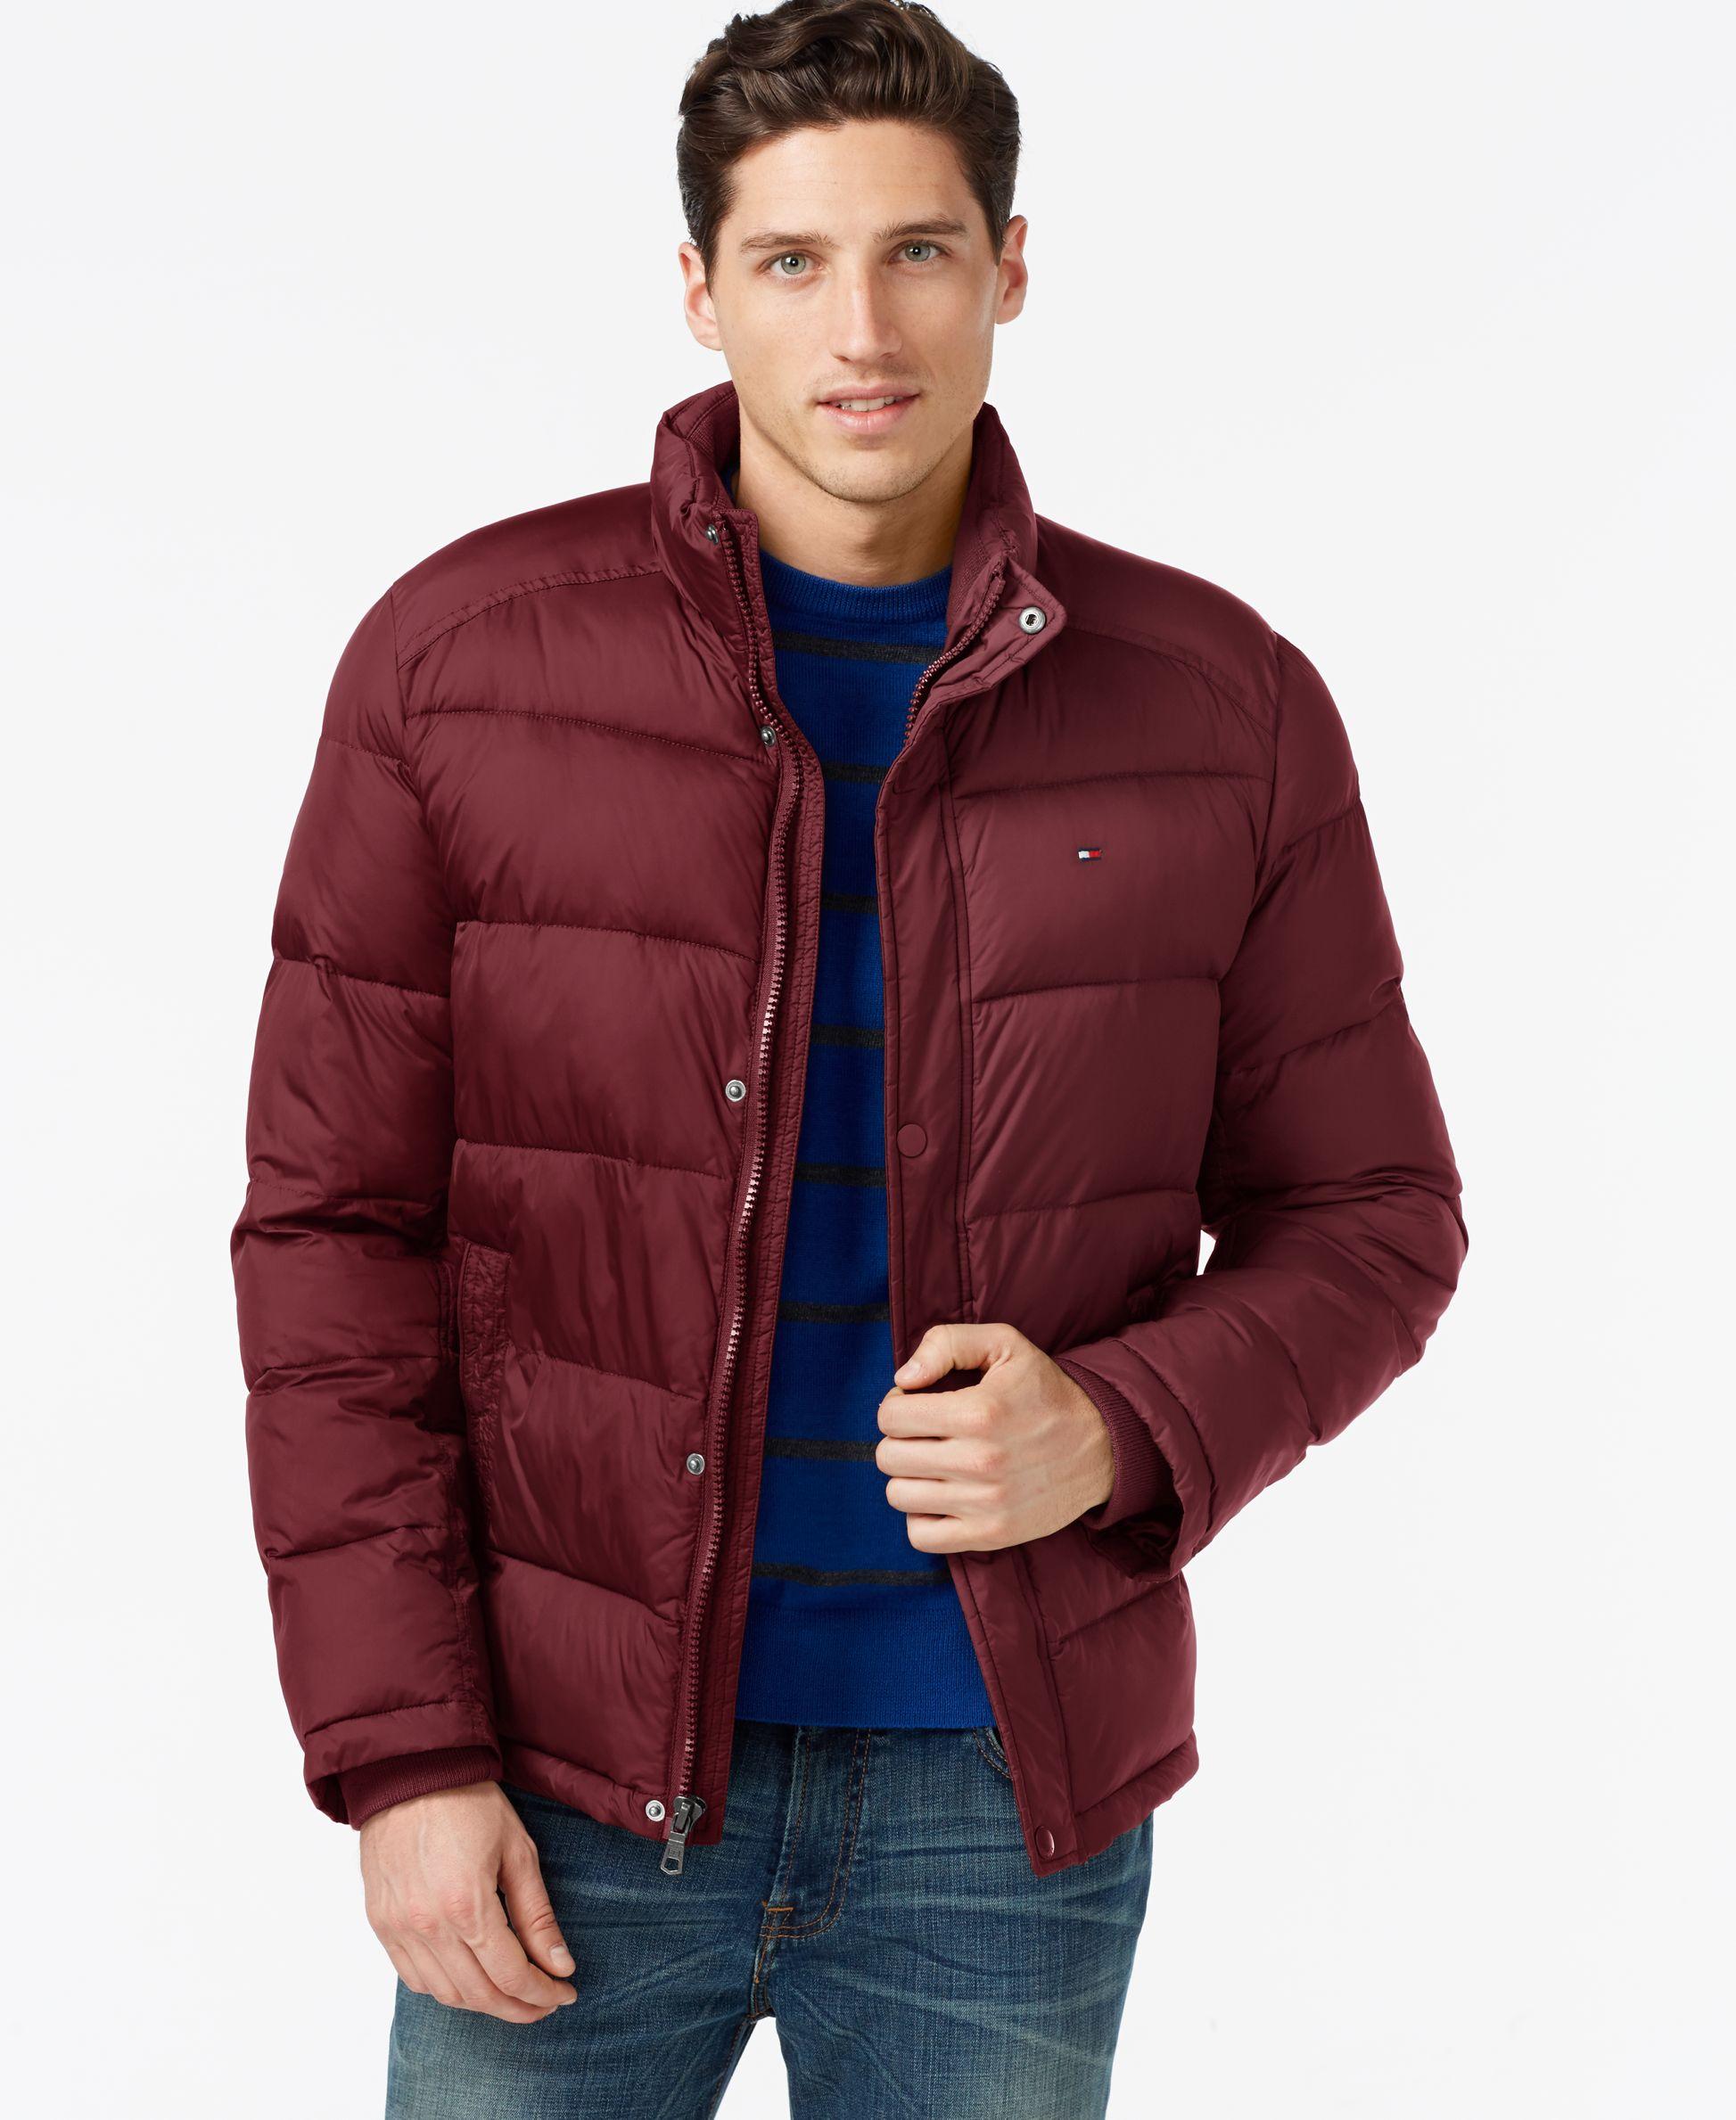 Tommy Hilfiger Synthetic Classic Puffer Jacket in Red for Men - Lyst